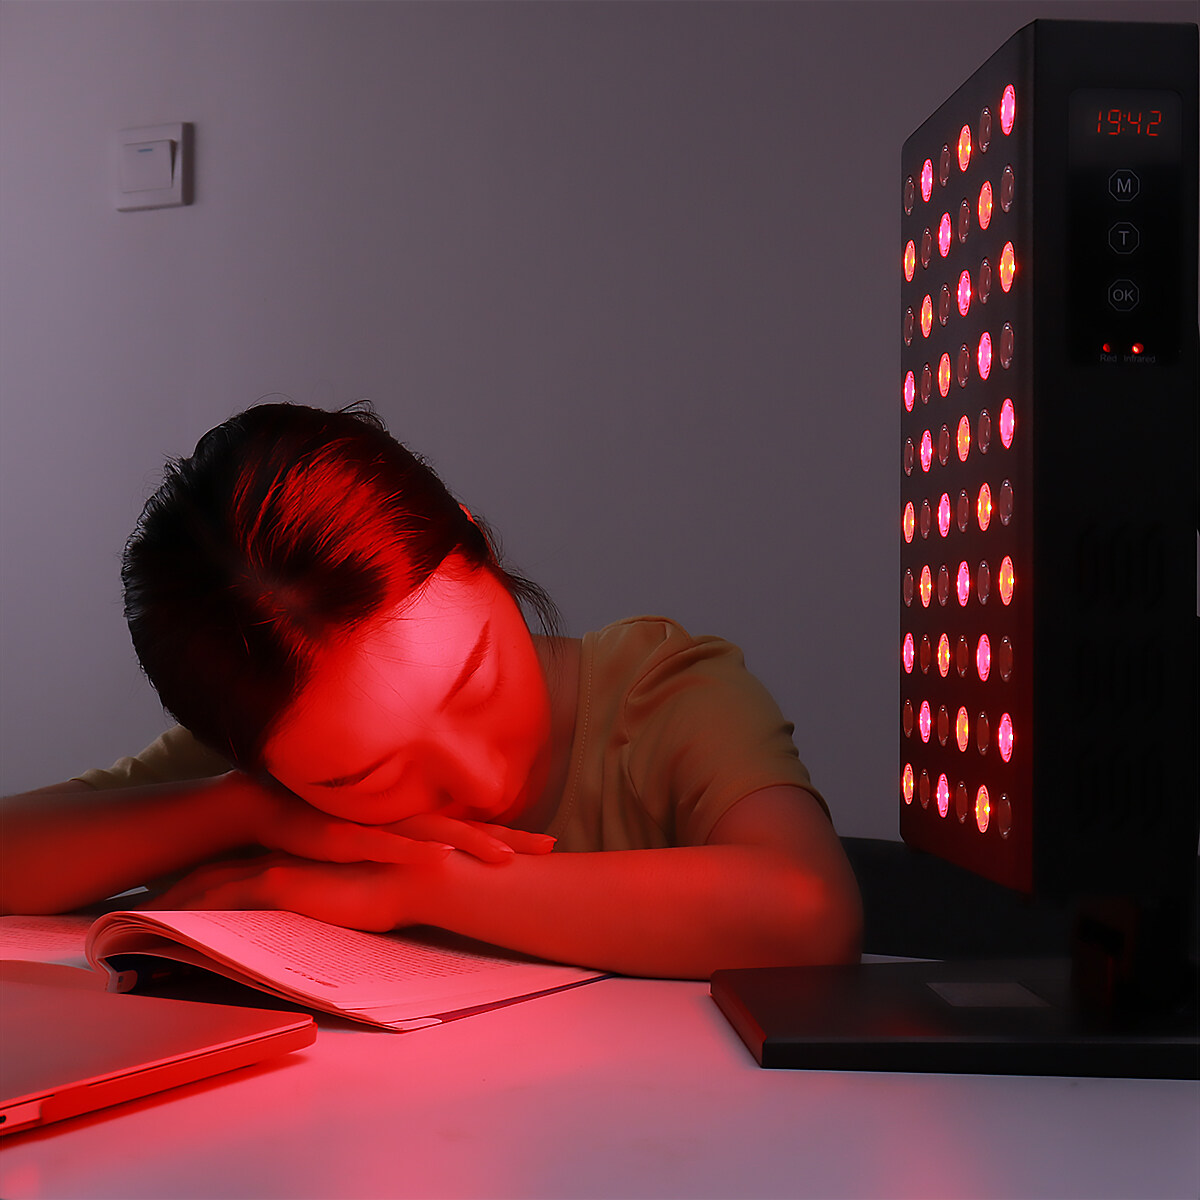 red light therapy for acne, red light therapy for back acne, acne red light therapy